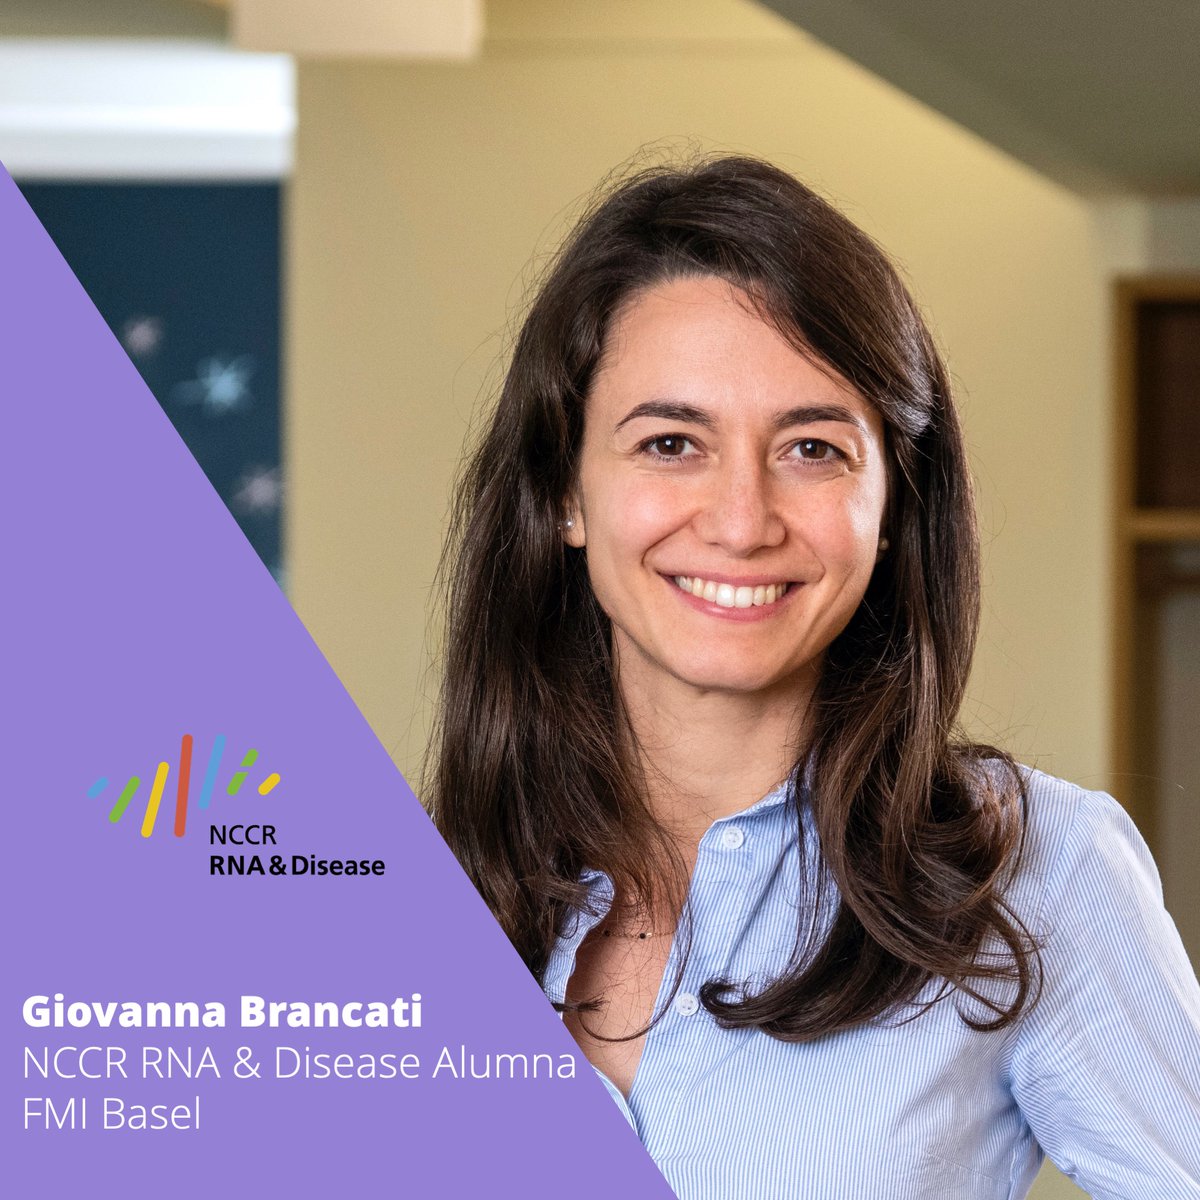 “Mentors can be a precious resource. It takes time to cultivate mentorship relationships, but it is worth it!” Meet @NCCR_RNADisease alumna Giovanna Brancati @brangiov in her portrait for @NCCRWomen: bit.ly/3oUkOyi @FMIscience @snf_ch @Twist_Basel @500womensci